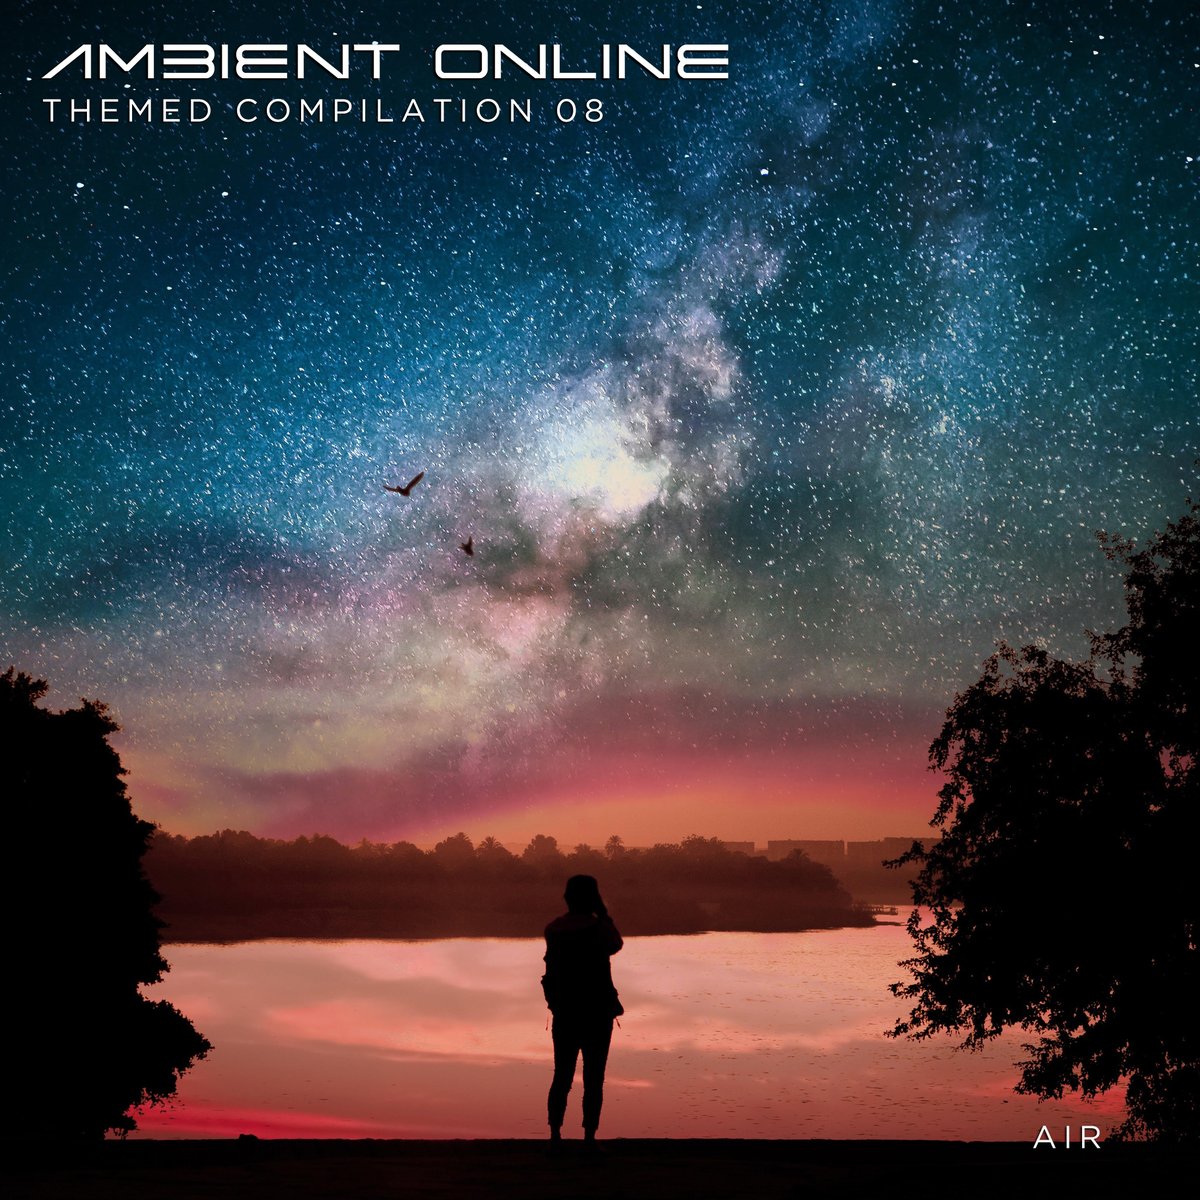 Available now for pre-order! Ambient Online Themed Compilation 08: Air ambientonline.bandcamp.com/album/ambient-… #ambient #ambientmusic #ambientonline #spacemusic